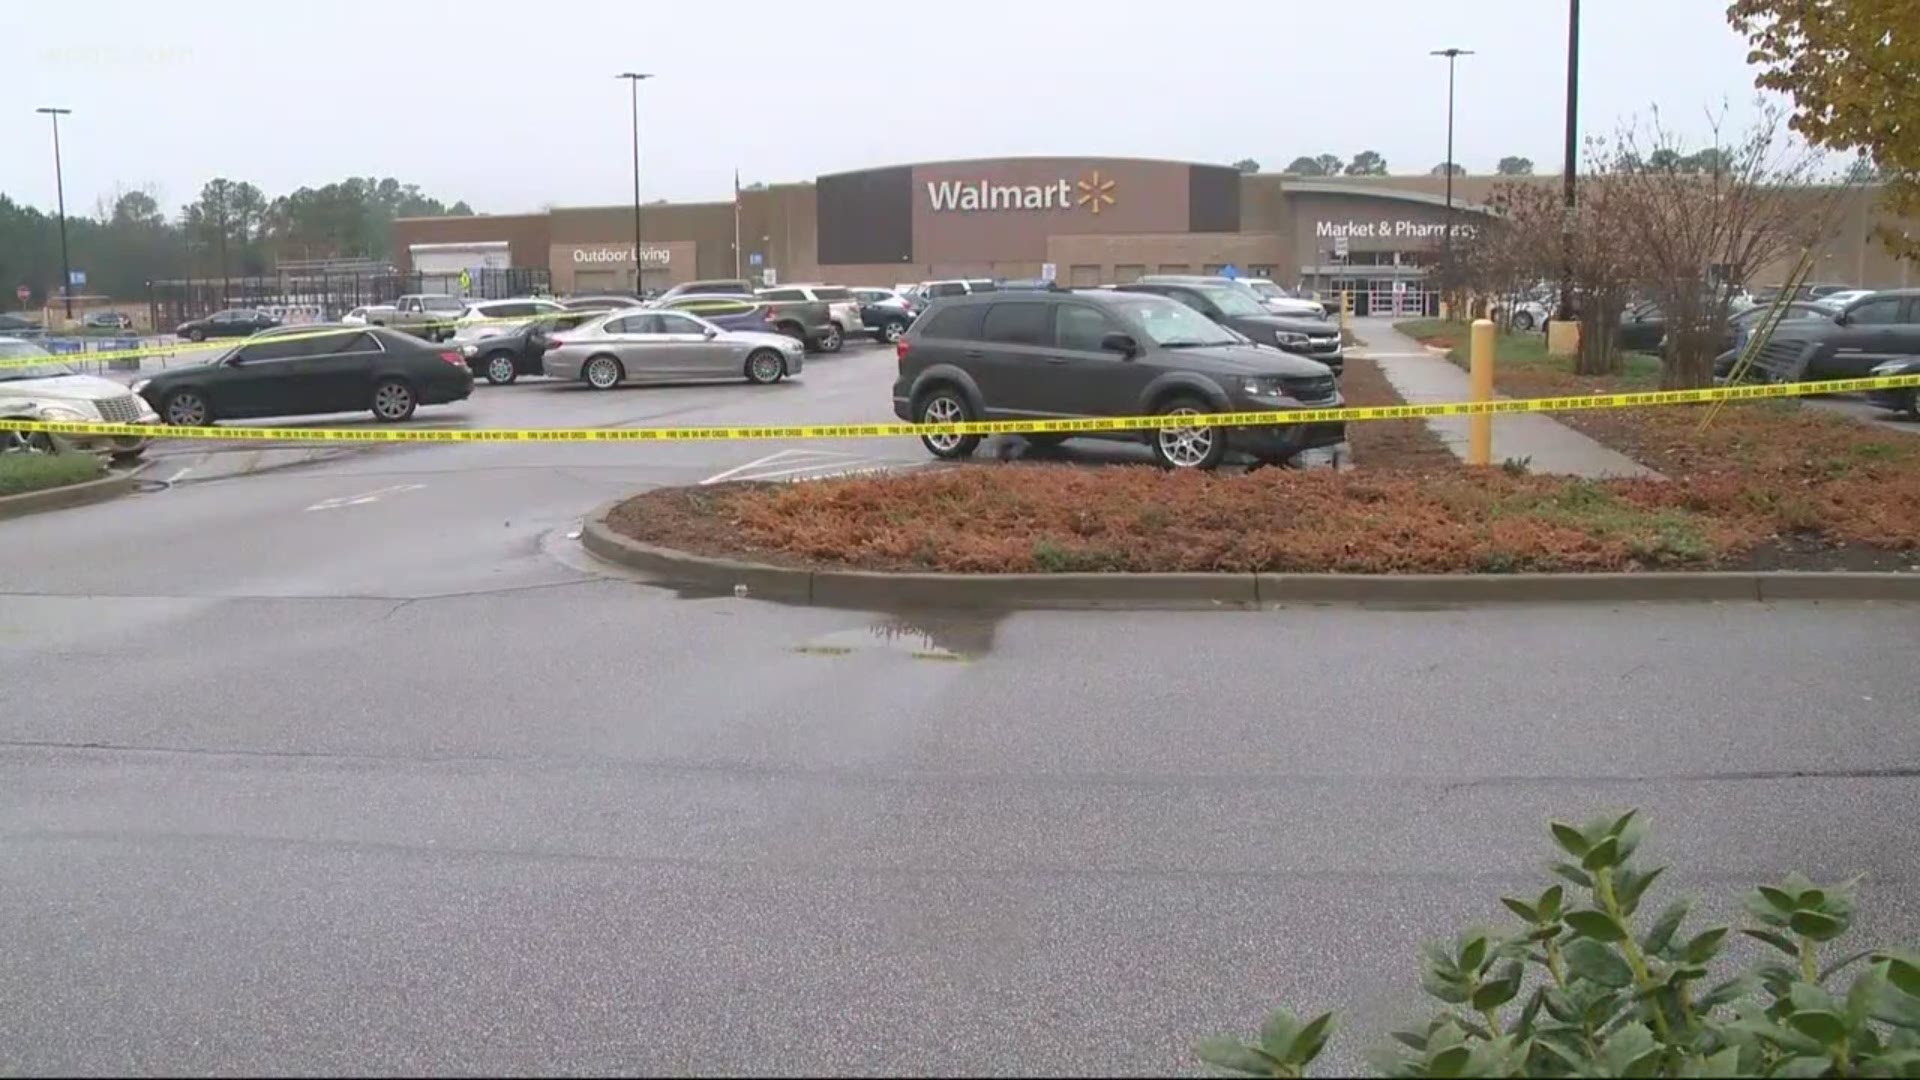 Officials say the officer-involved shooting started after a shoplifting incident inside the Walmart.